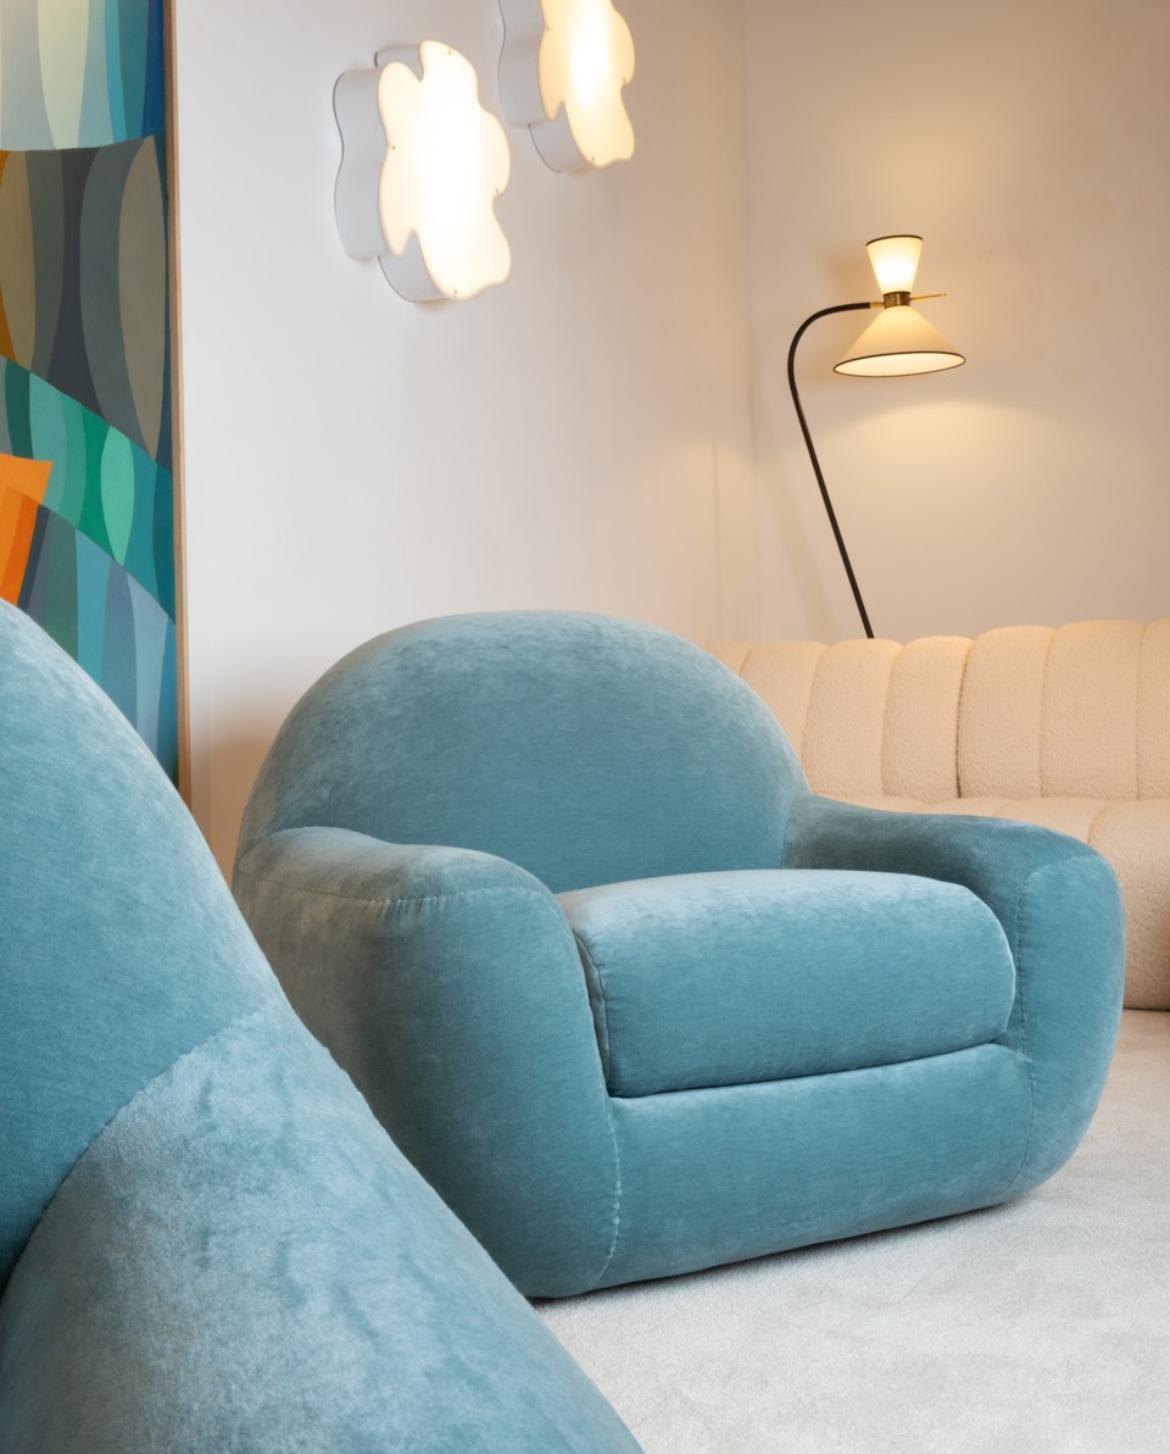 Pair of velvet  armchairs by Beka from 70s

Beka is in fact a renowned Italian furniture publisher
 Here is a general biography about the Beka Mobili company
 Mobili is an Italian company specializing in the design and manufacture of high-end